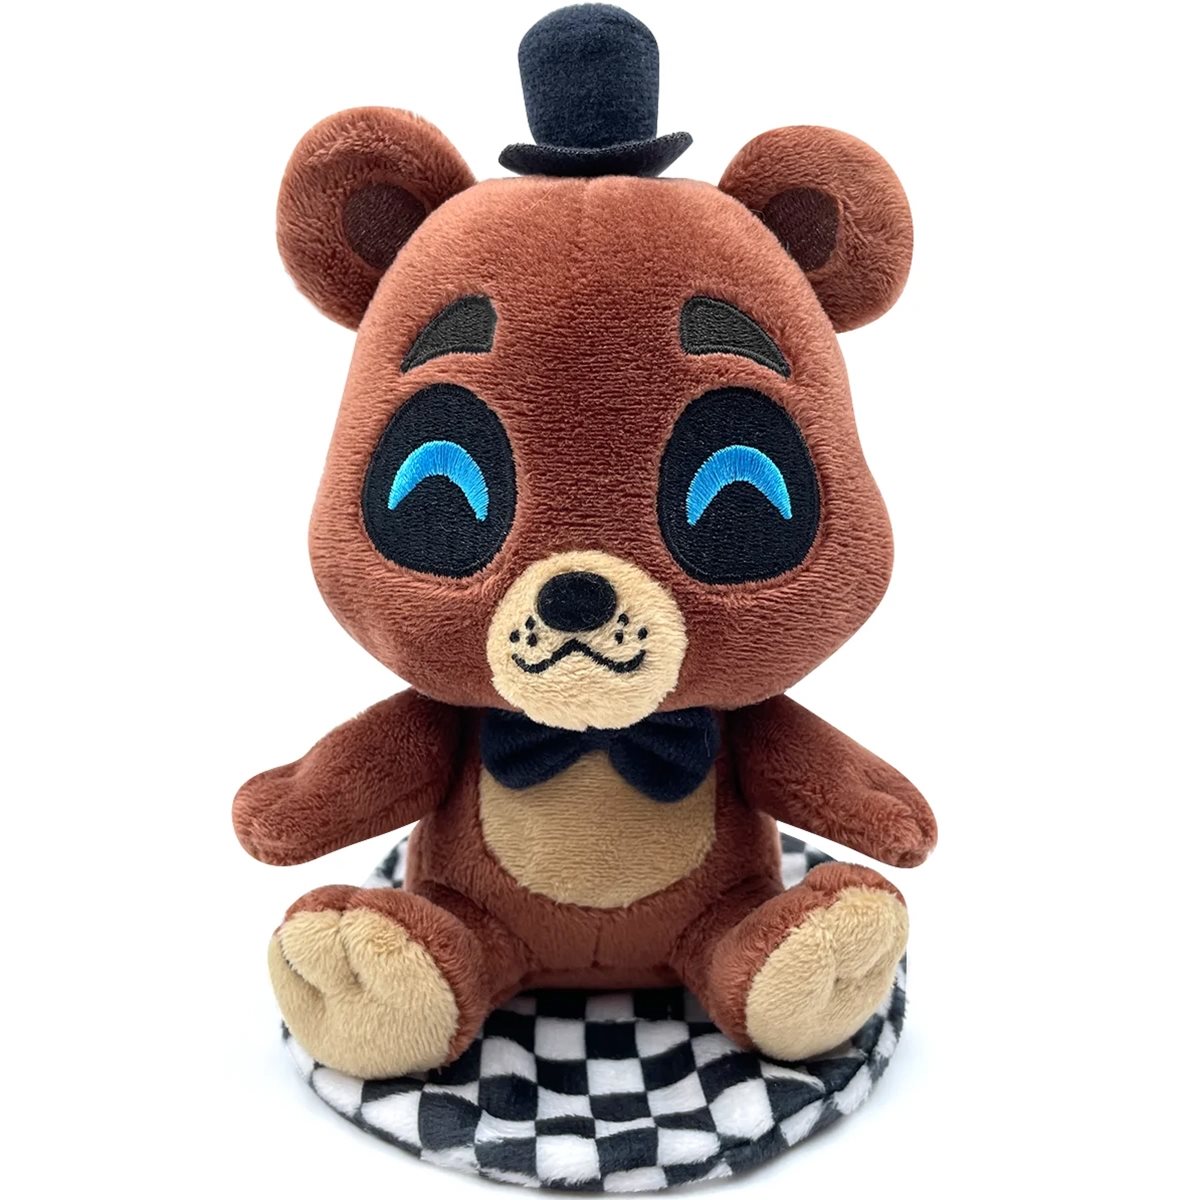 fnaf 6 peluches - Buy fnaf 6 peluches with free shipping on AliExpress